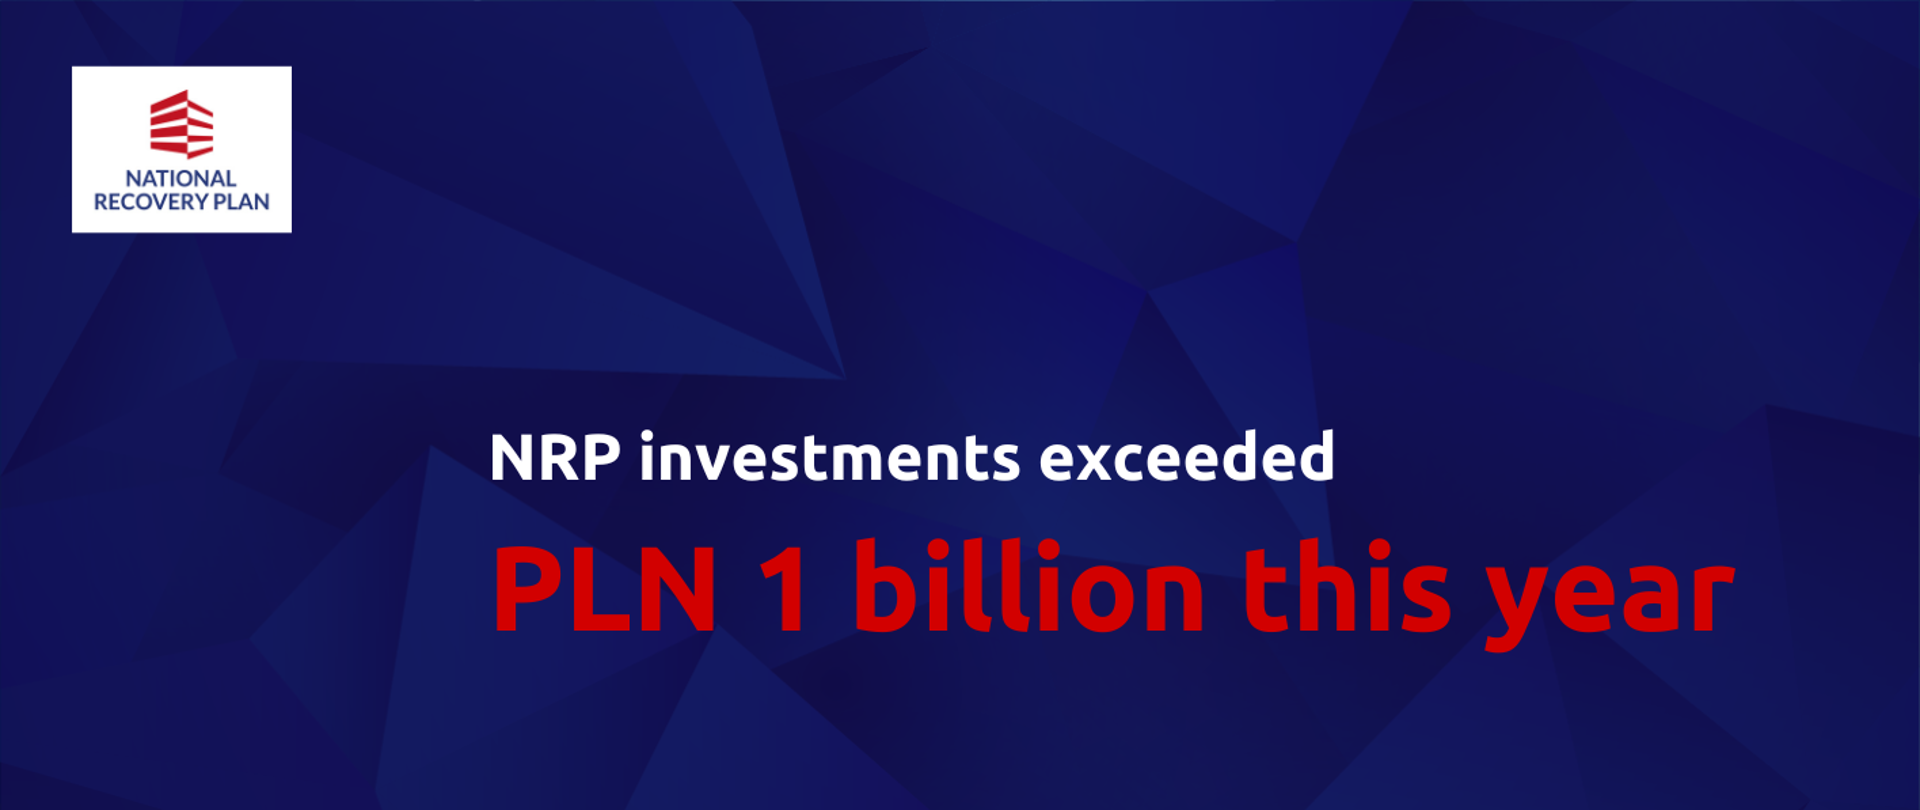 NRP investments exceeded PLN 1 billion this year